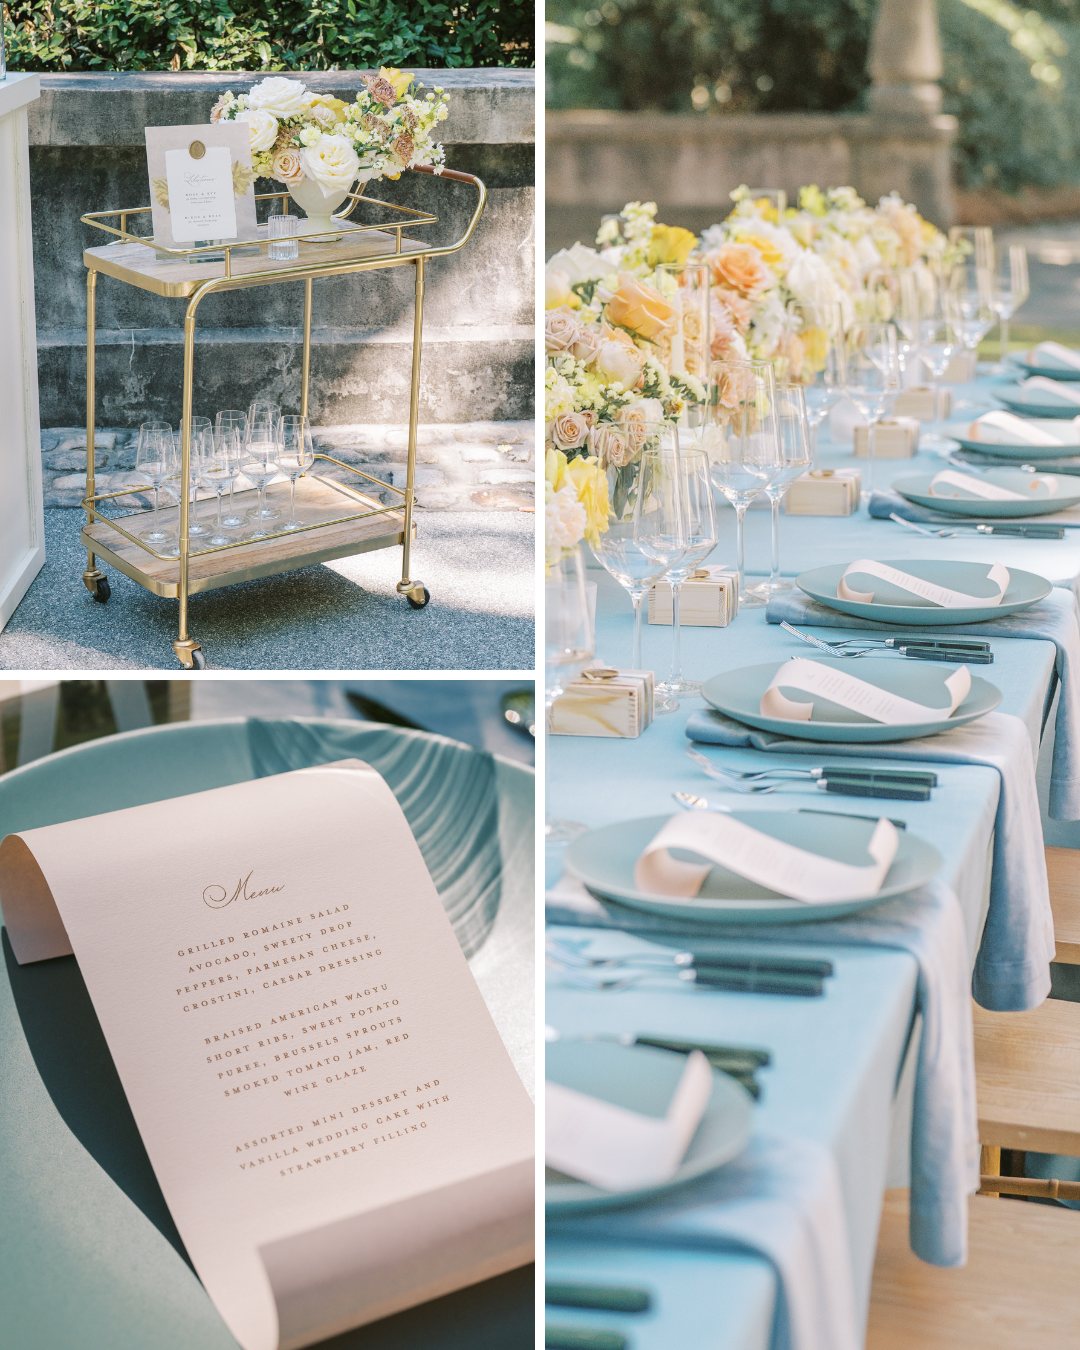 Details of a wedding reception set up with table and bar cart